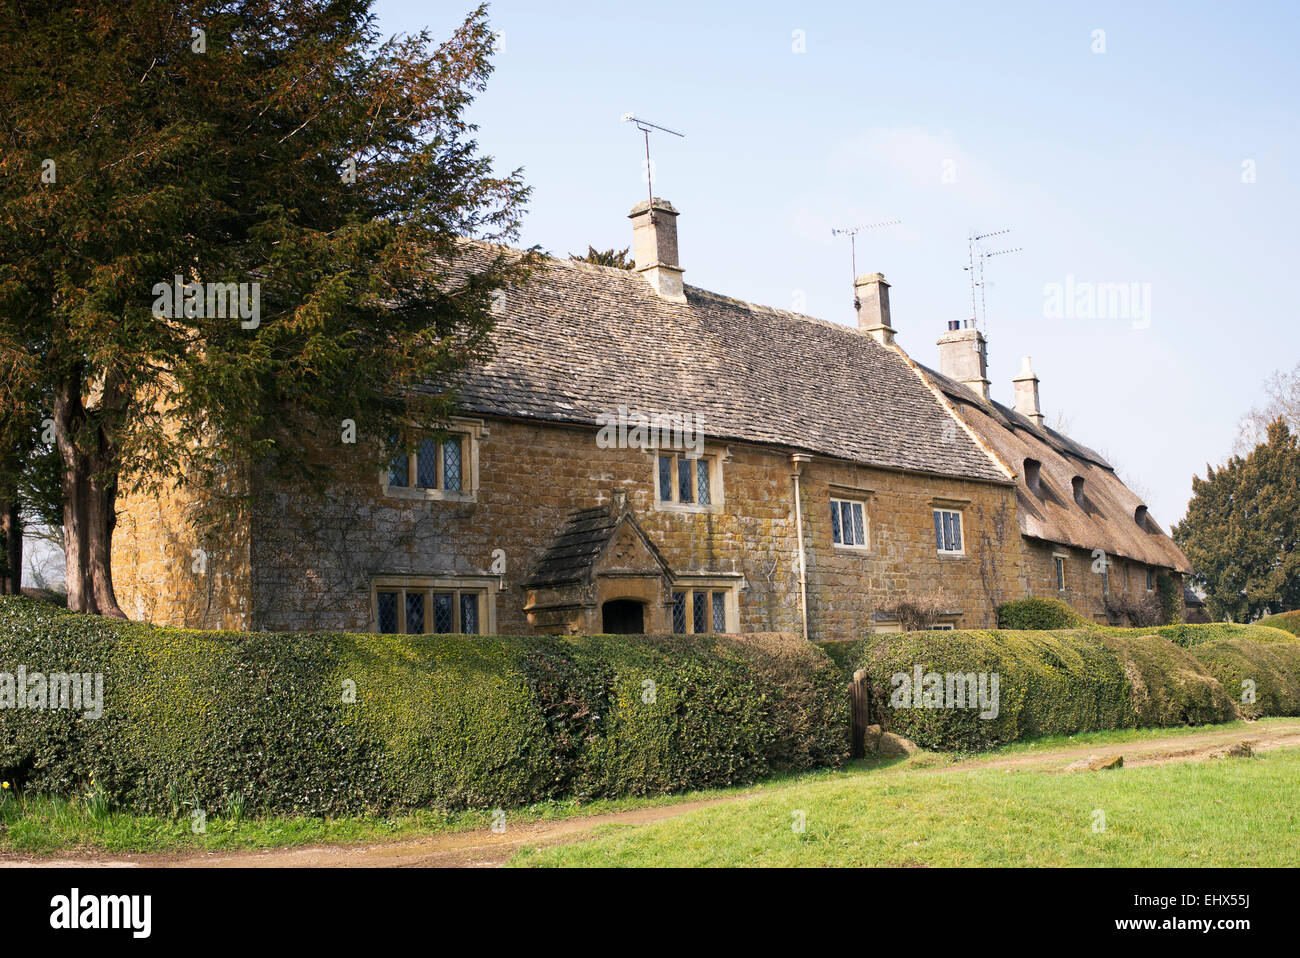 English cottages. Great Tew, Oxfordshire, England Stock Photo